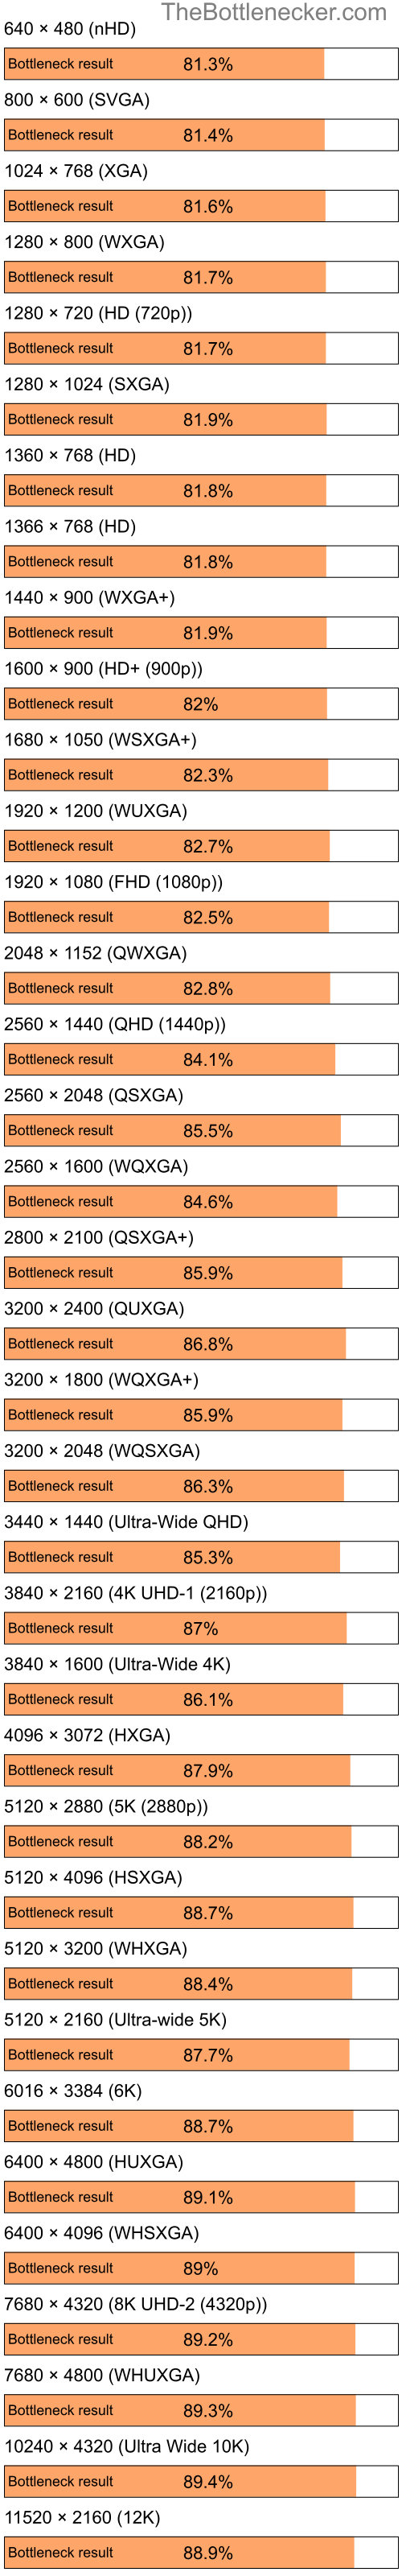 Bottleneck results by resolution for Intel Celeron M and NVIDIA GeForce 6150 LE in Graphic Card Intense Tasks